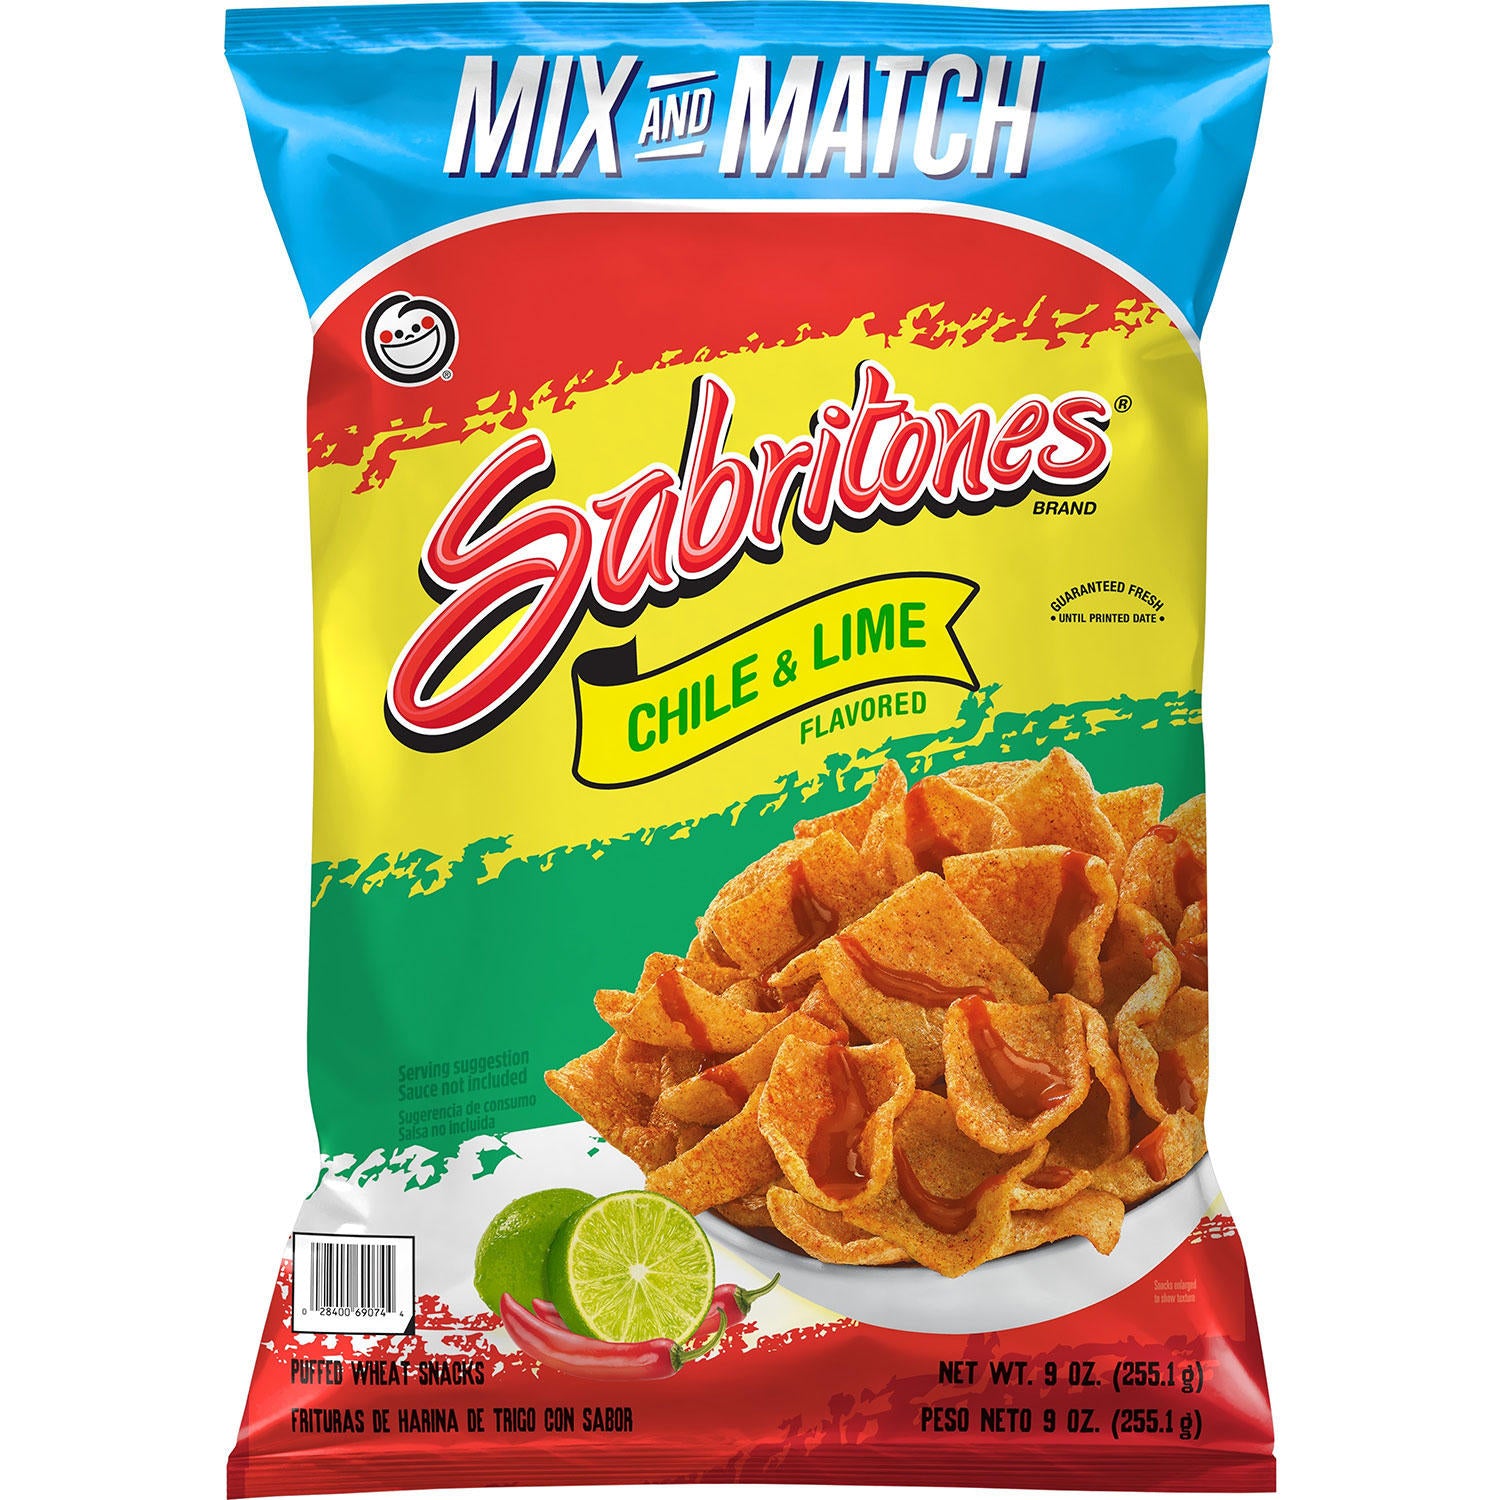 Sabritones Chile & Lime Flavored Puffed Wheat Snacks